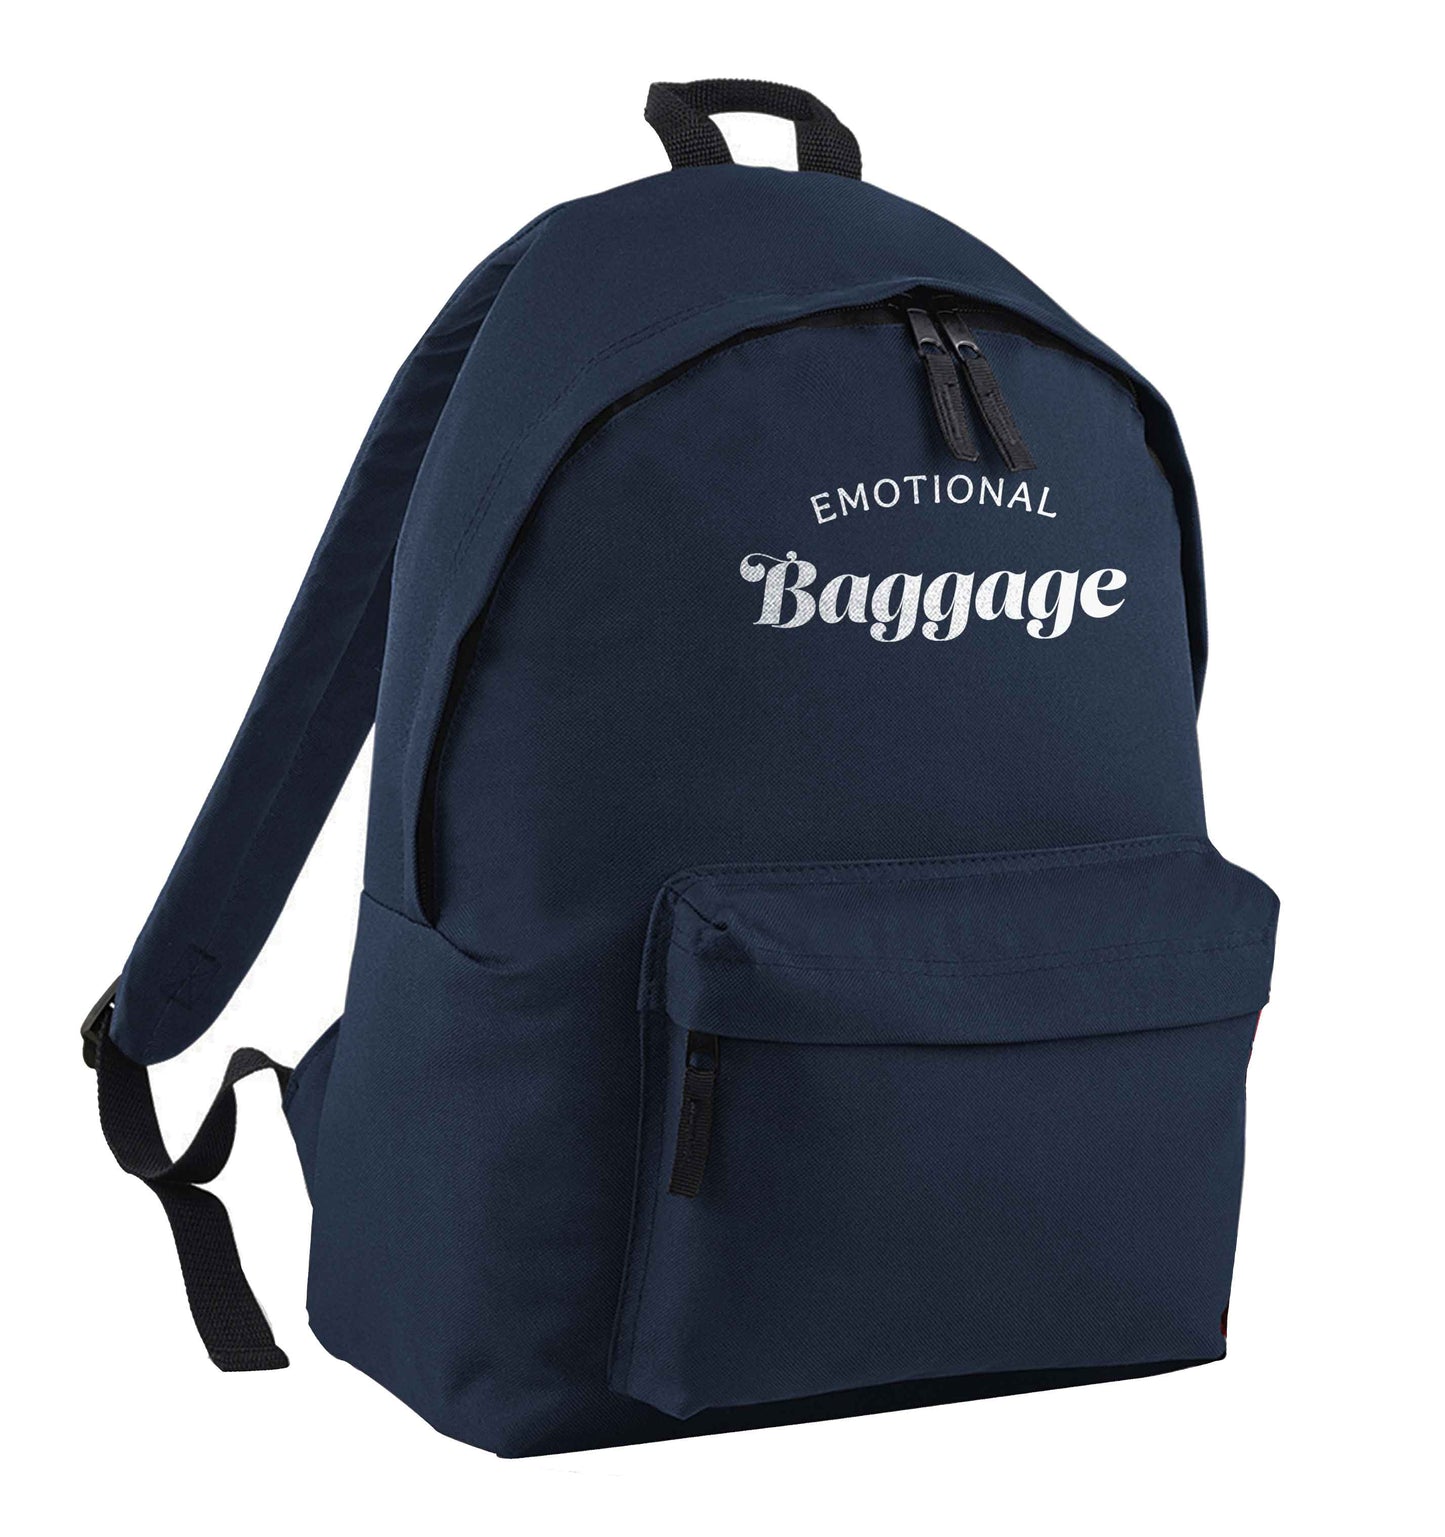 Emotional baggage navy adults backpack